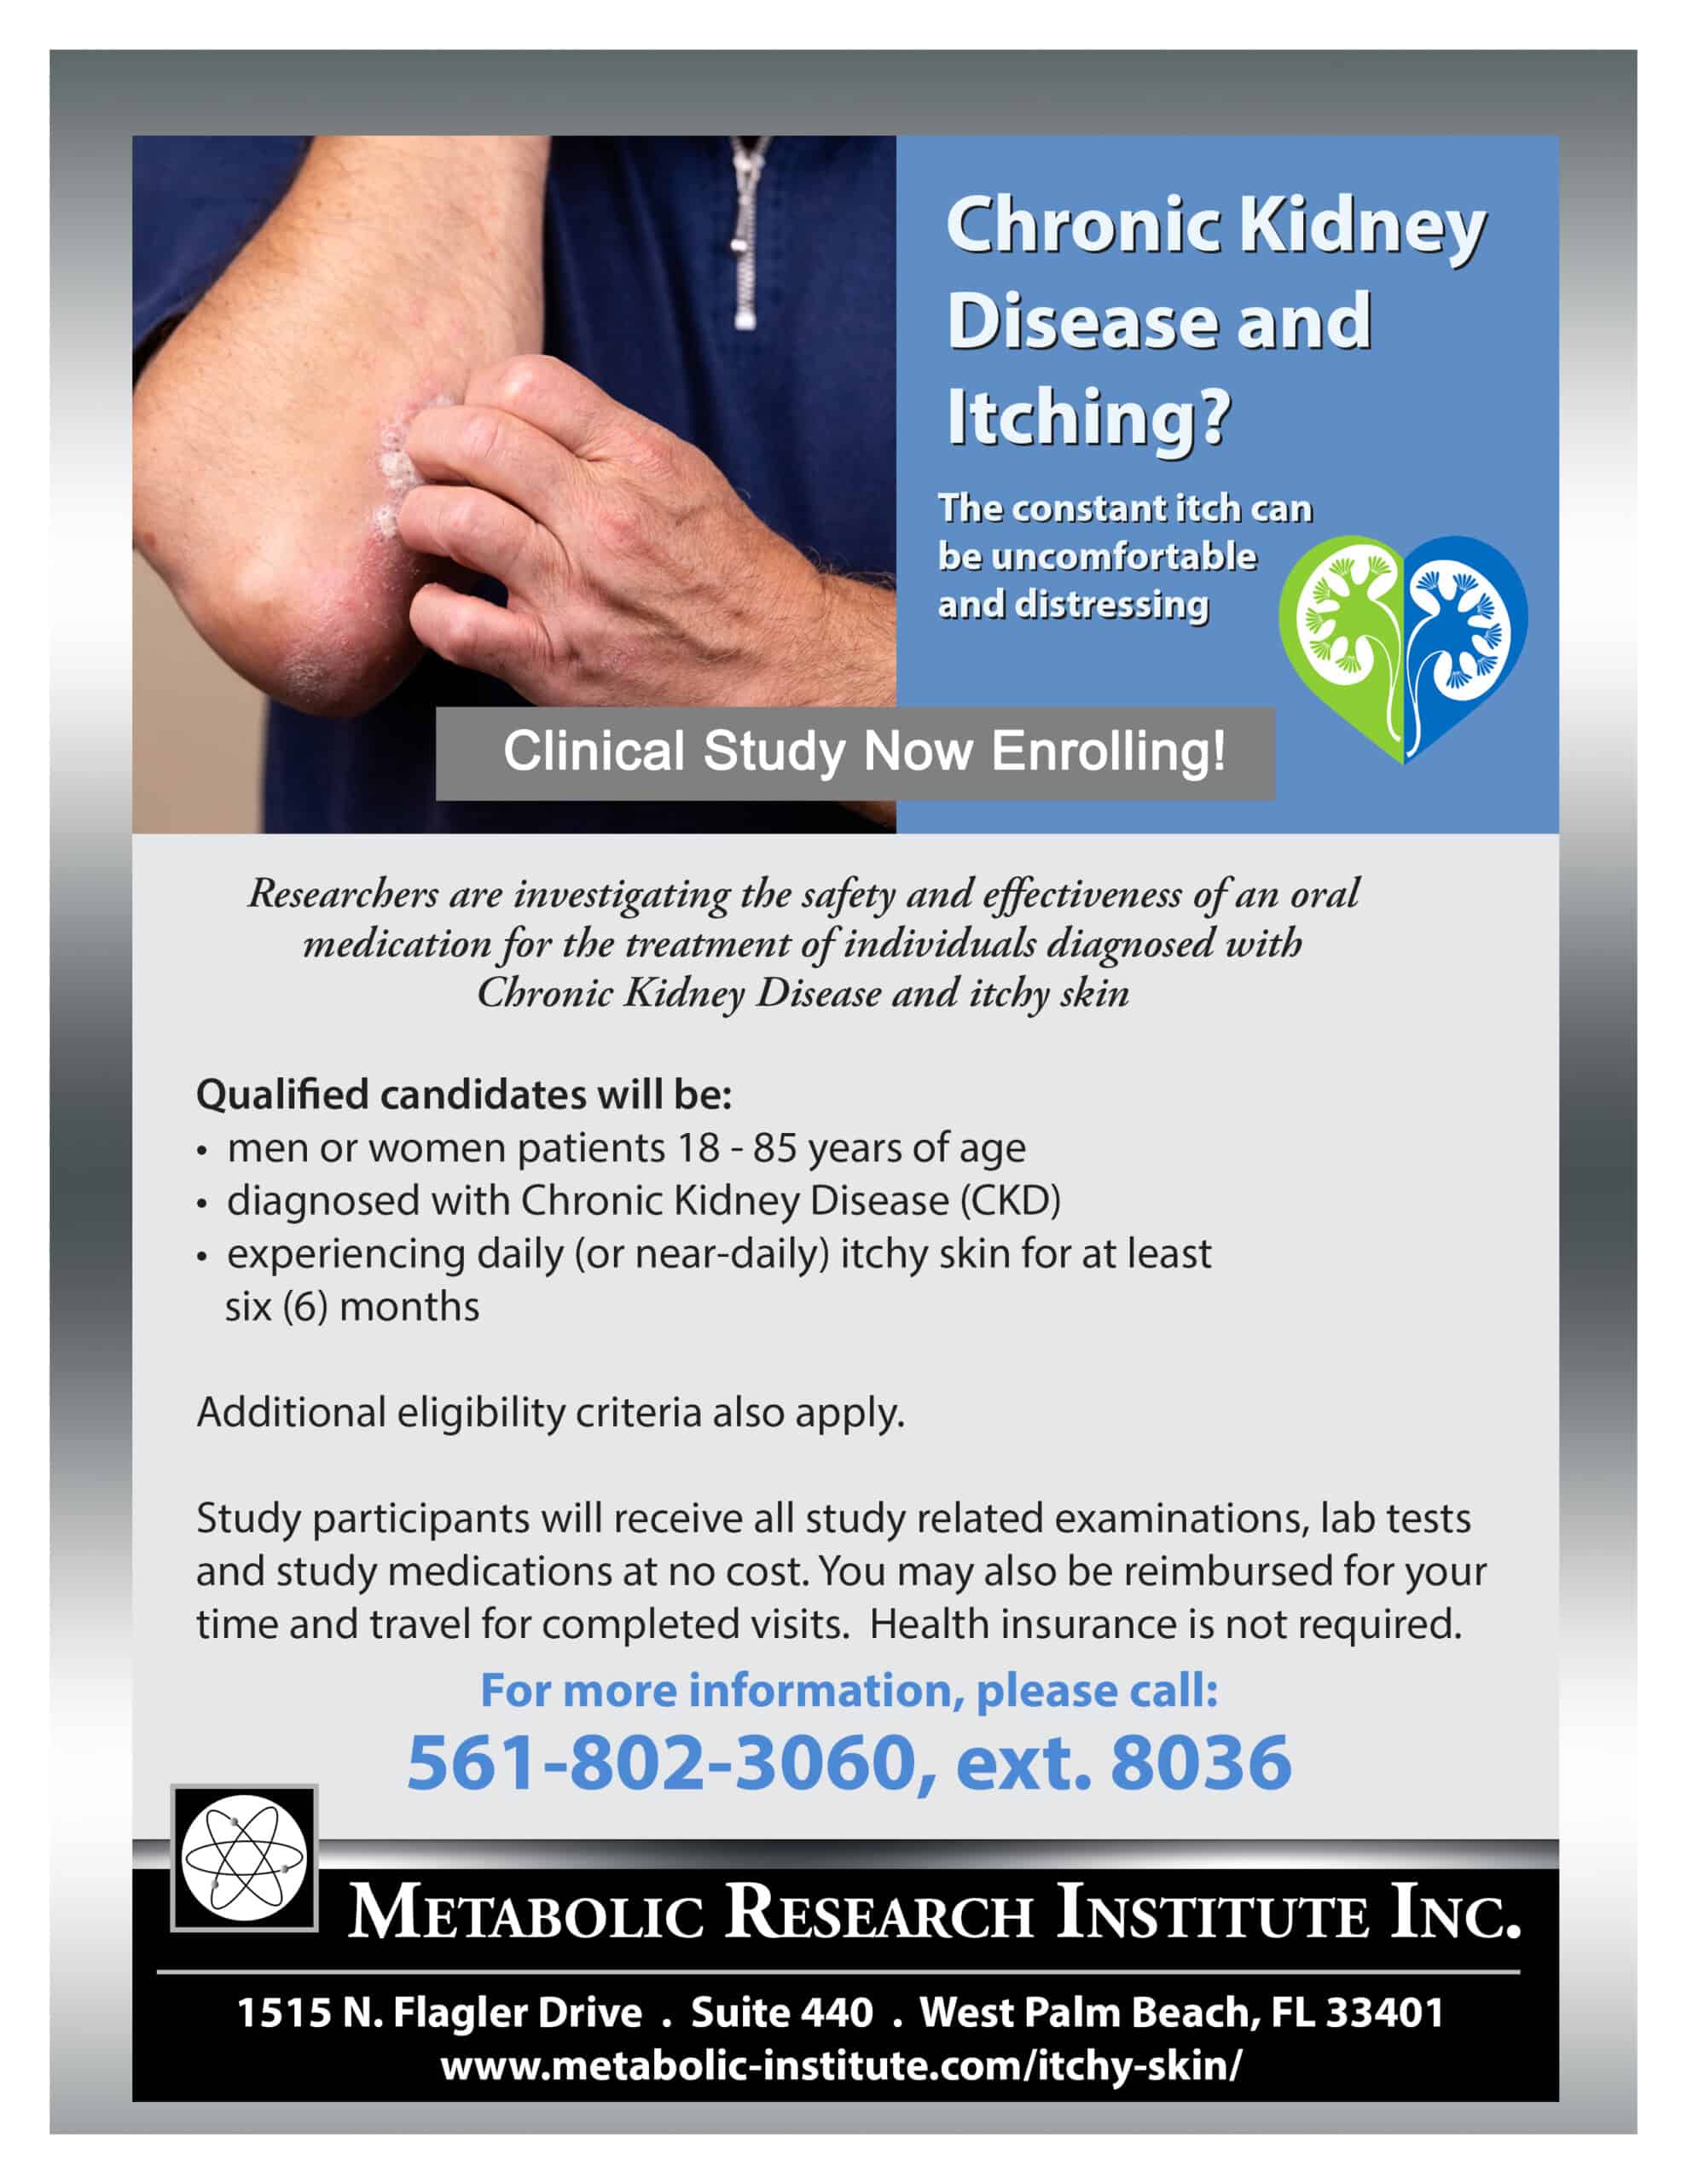 CKD and itchy skin clinical study flyer